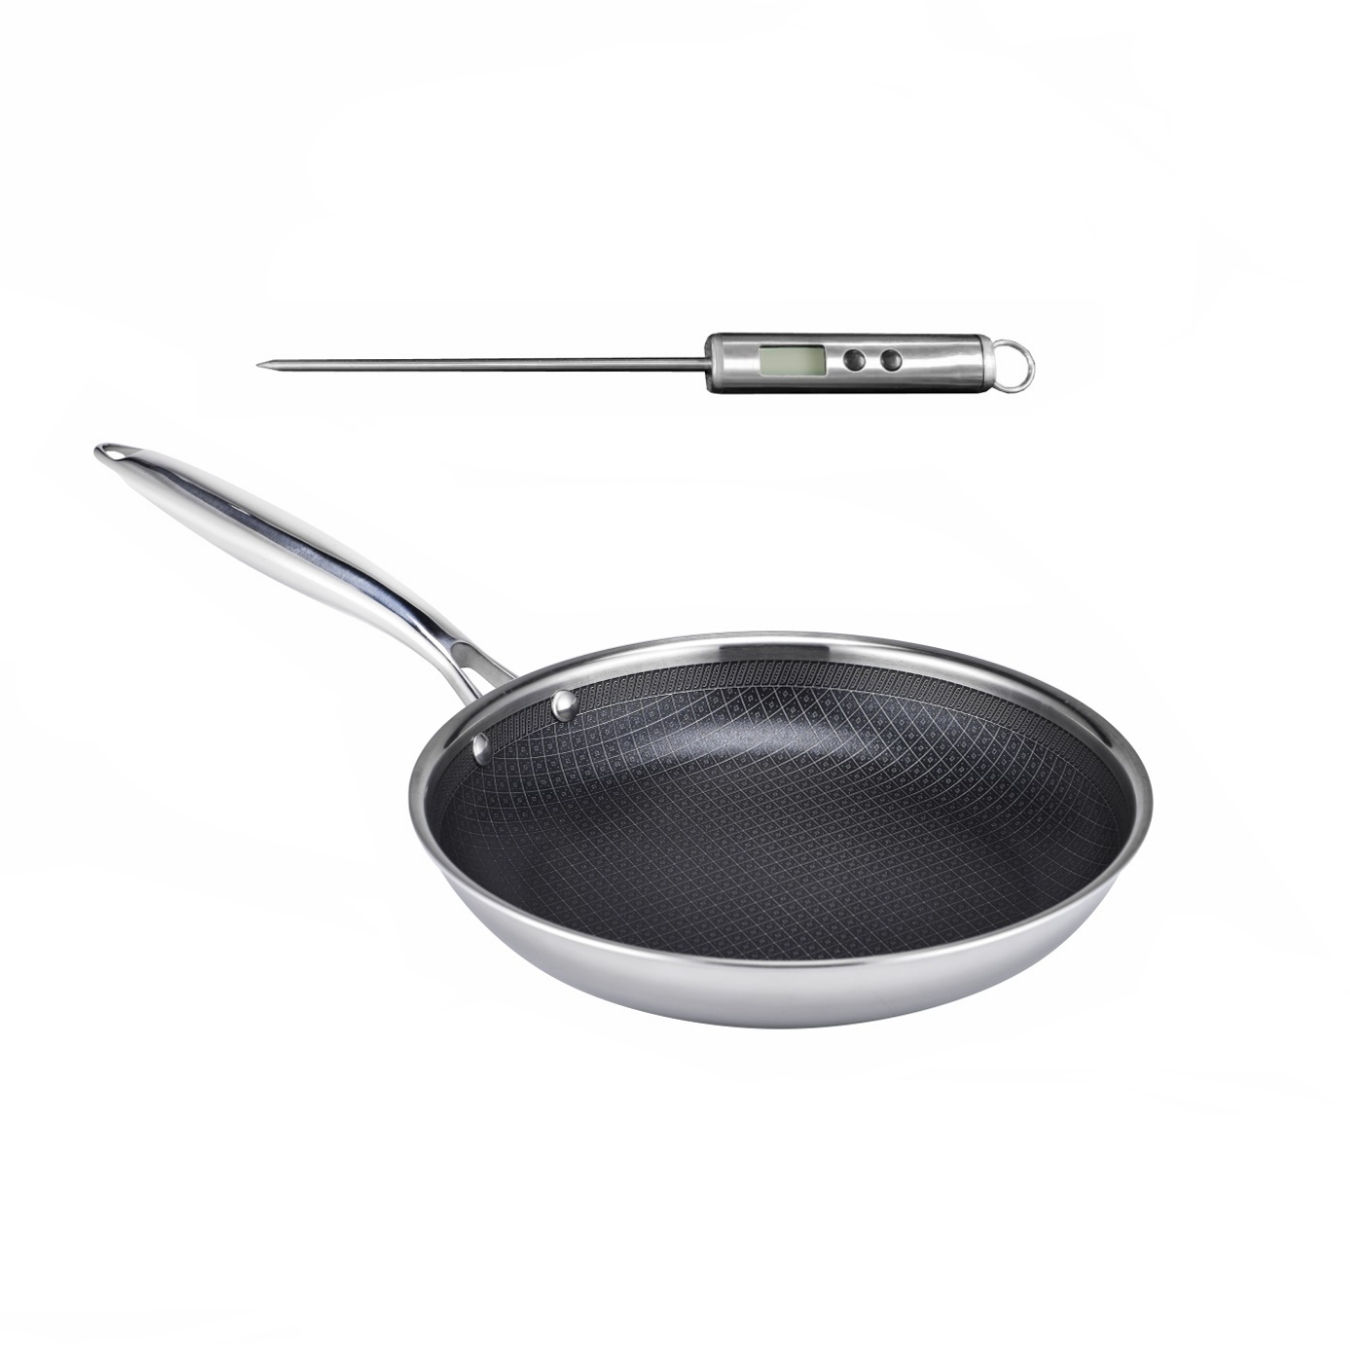 An image of Titan Pan 20cm Breakfast Pan and Thermometer